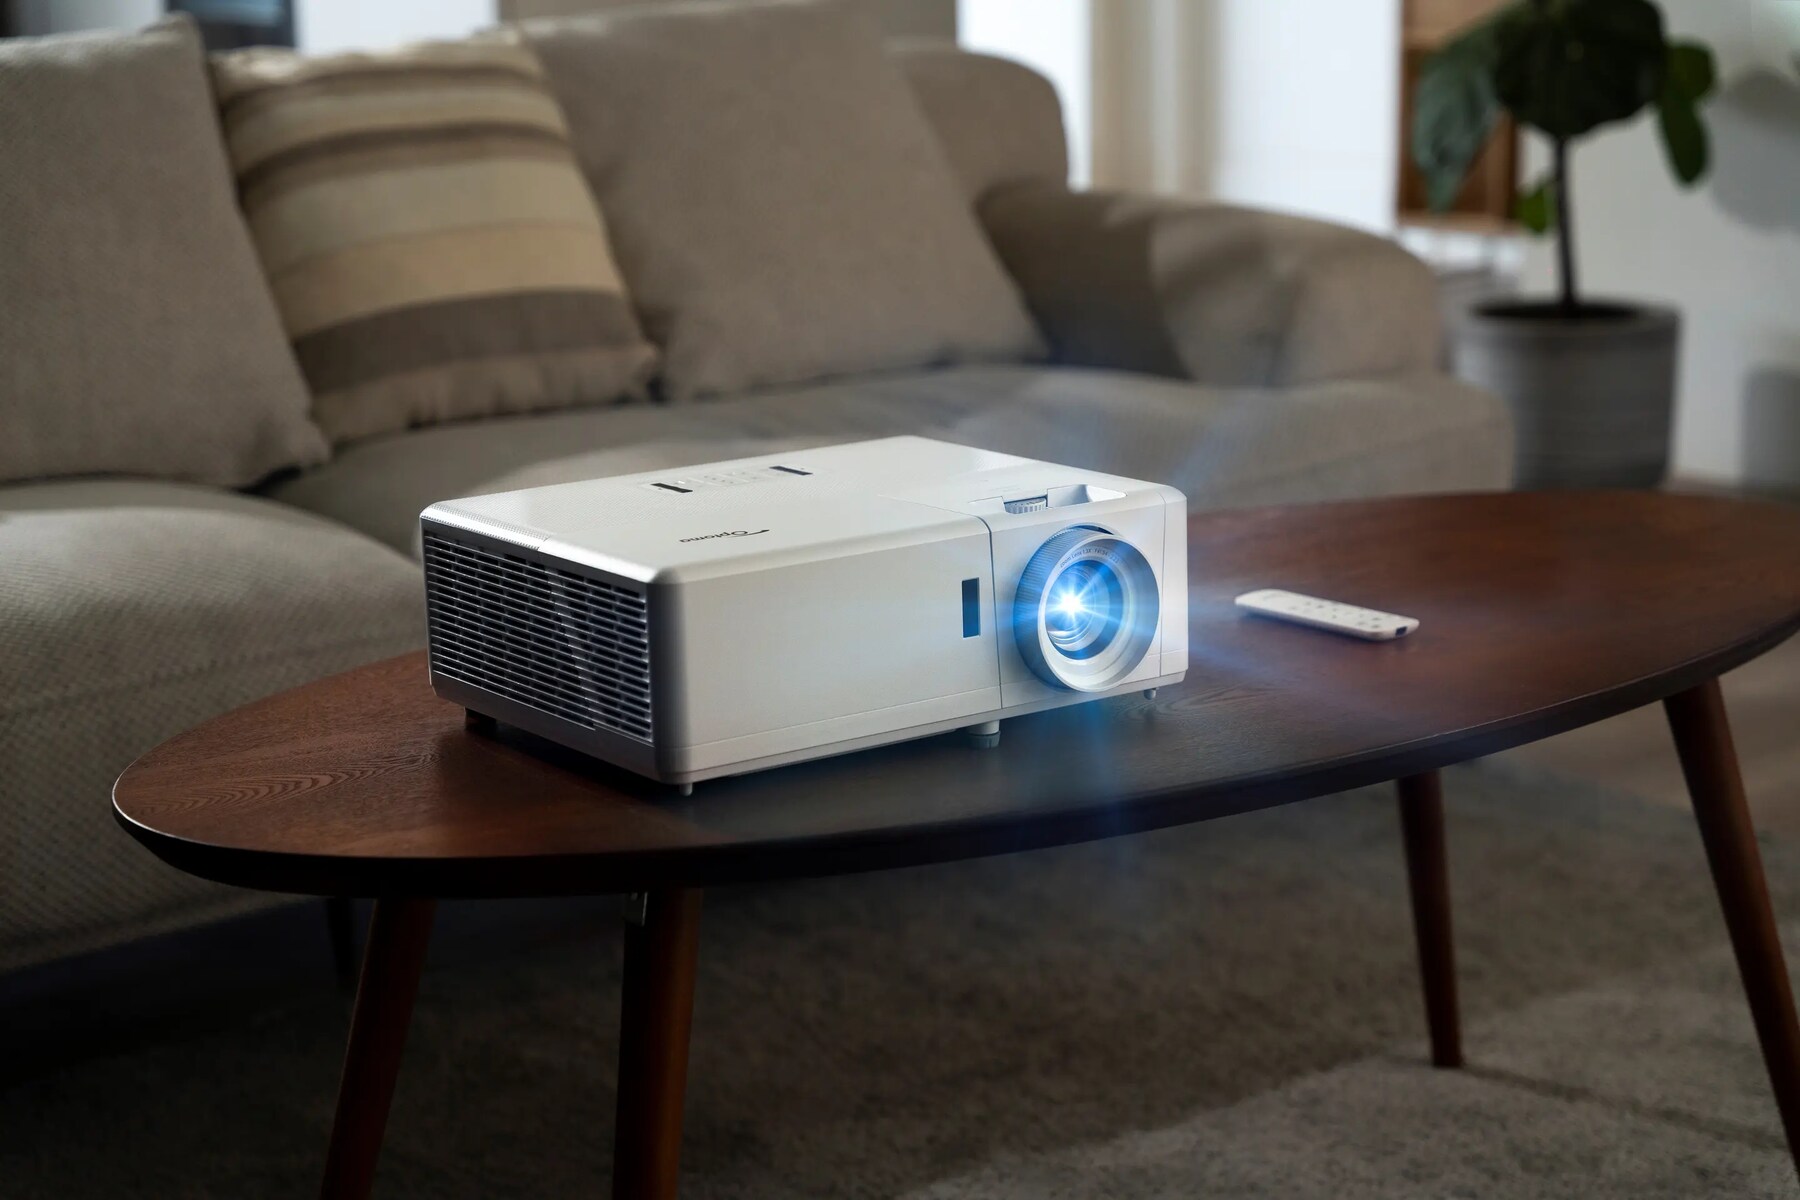 How To Connect Phone To Optoma Projector